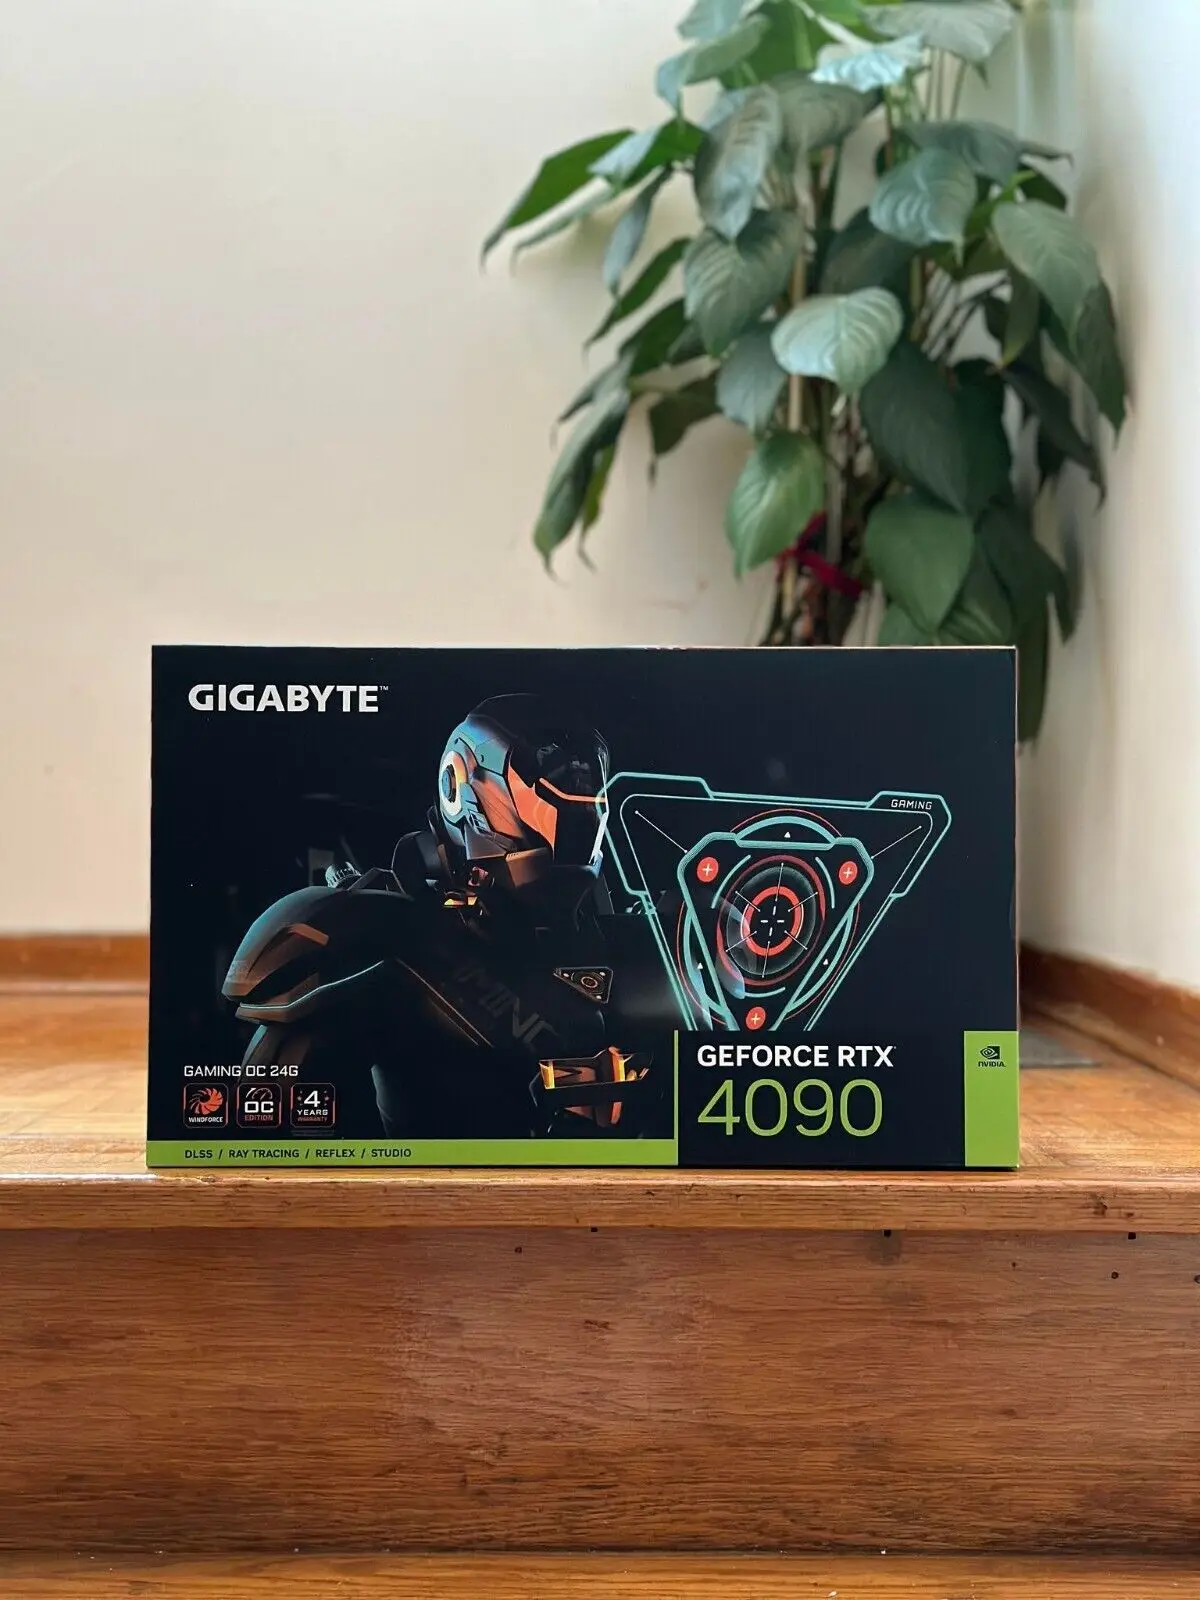 

BUY 3 GET 2 FREE GIGABYTE GeForce RTX 4090 GAMING OC 24G Graphics Card BRAND NEW SHIPS FAST